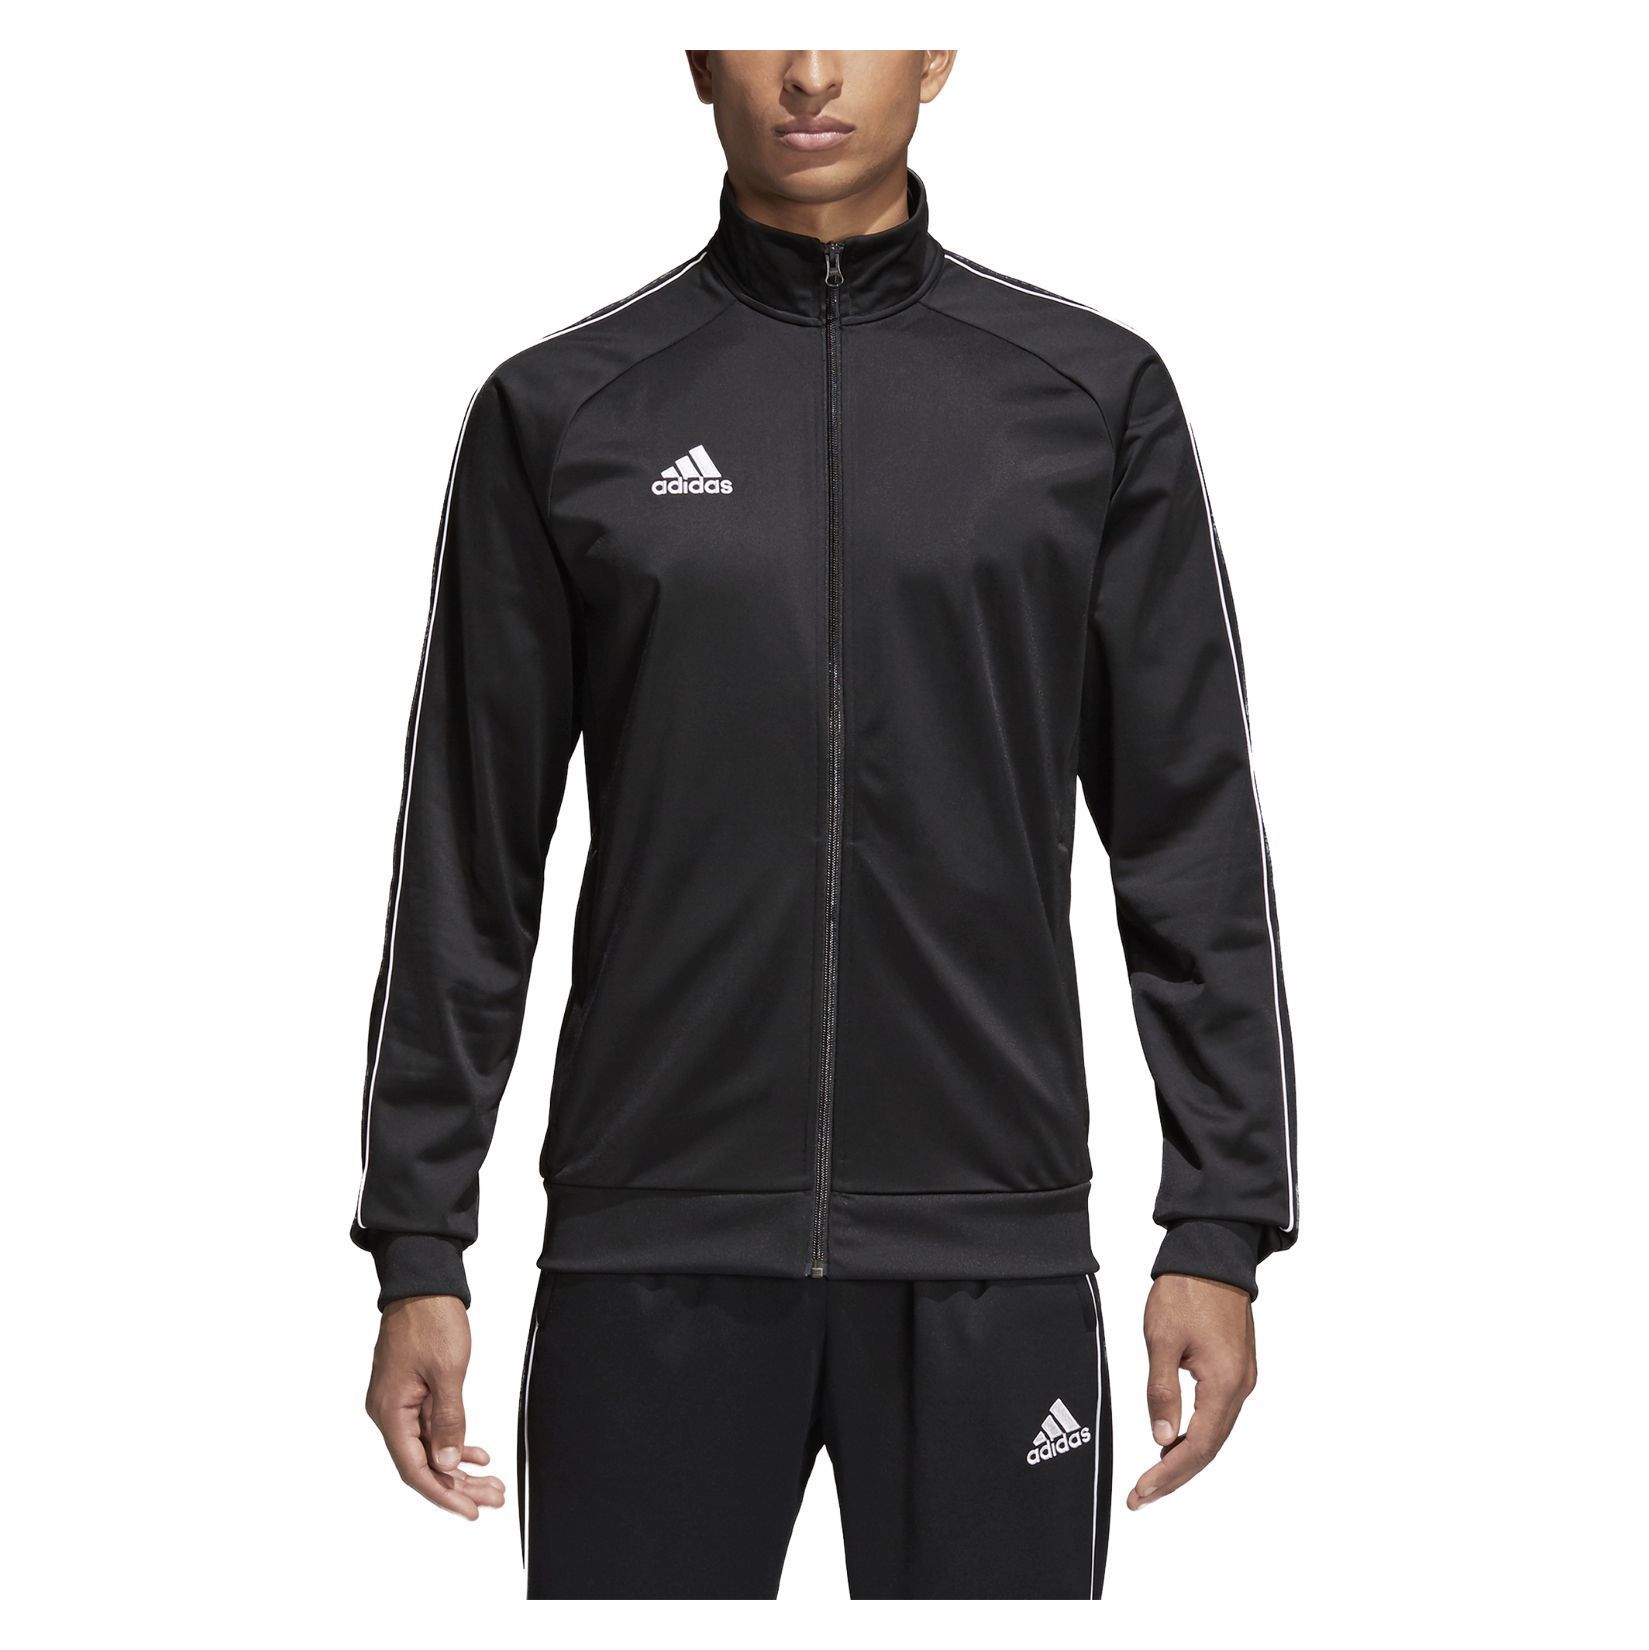 adidas core jacket, high sale Save 77% available - research.sjp.ac.lk